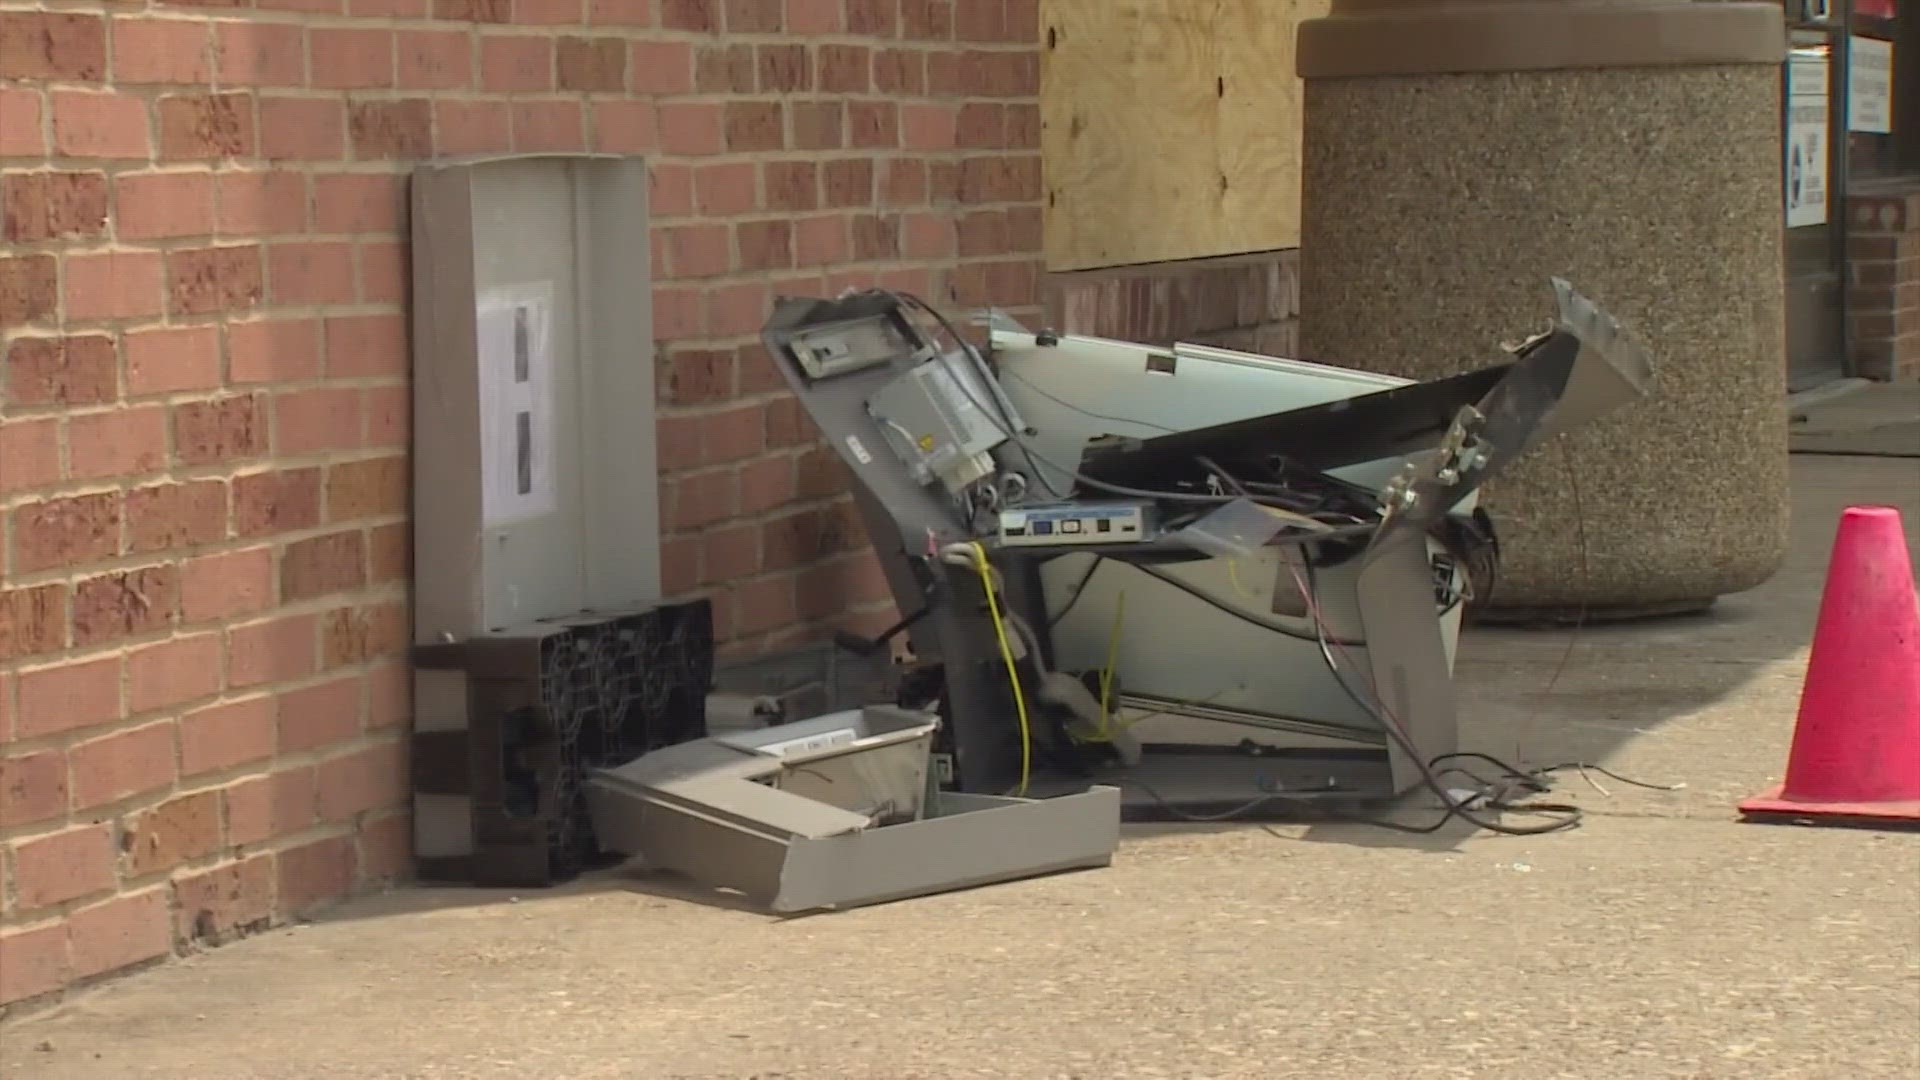 Plano police said the organized ATM burglaries took place over several months.